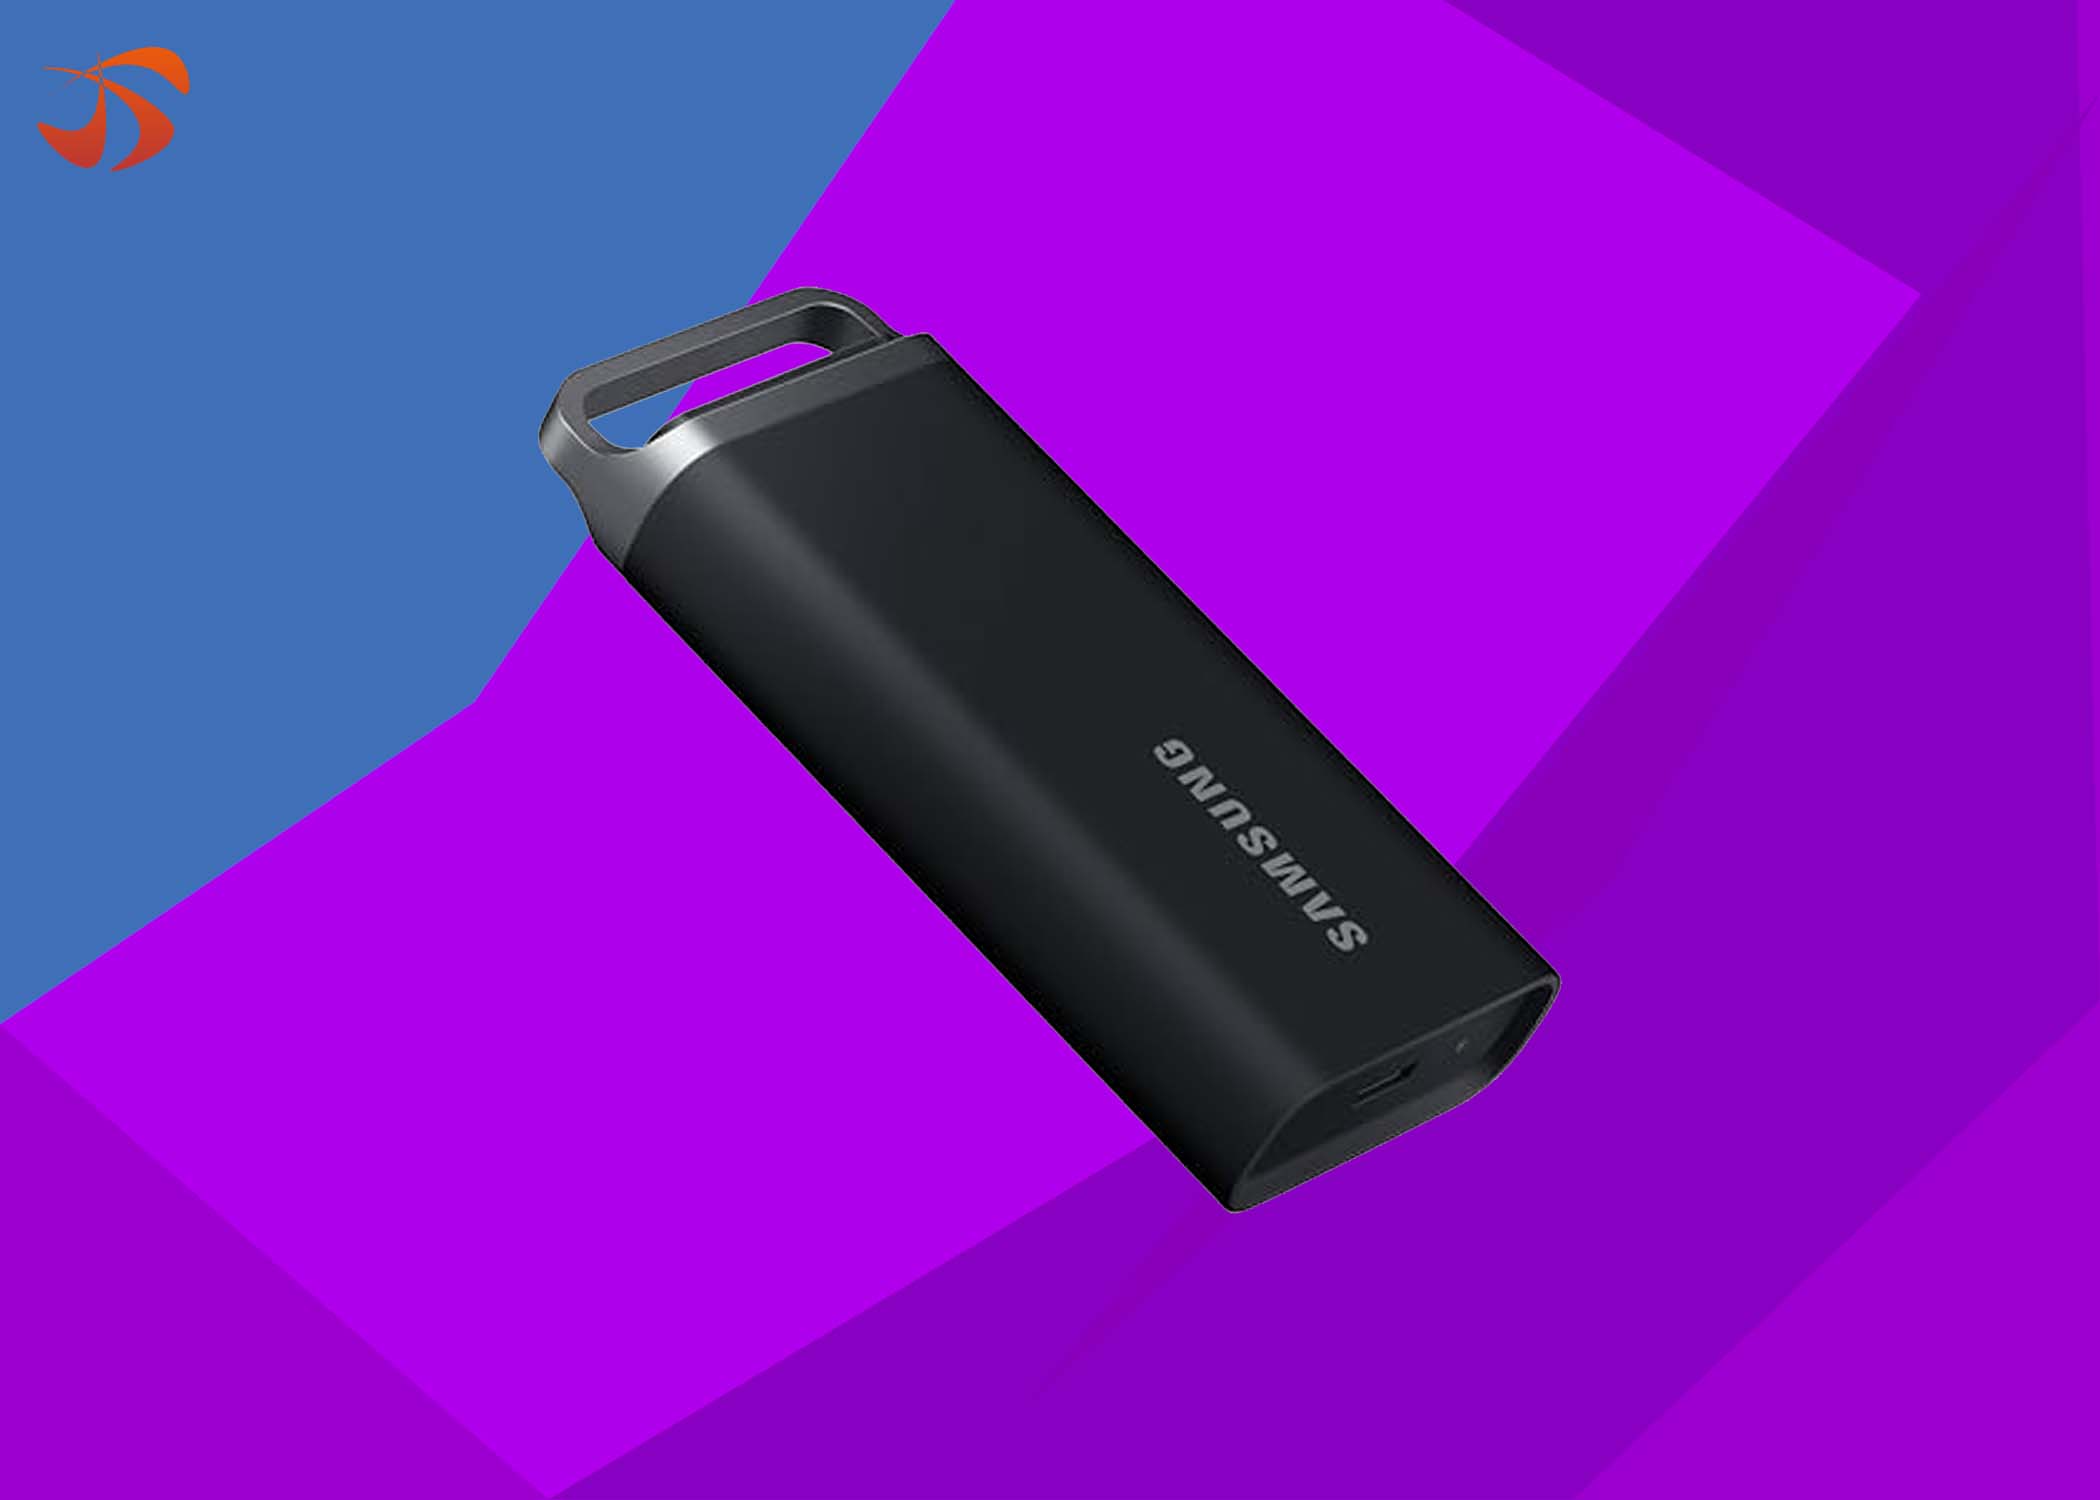 Samsung Portable SSD T5 EVO review: big capacity, compromised